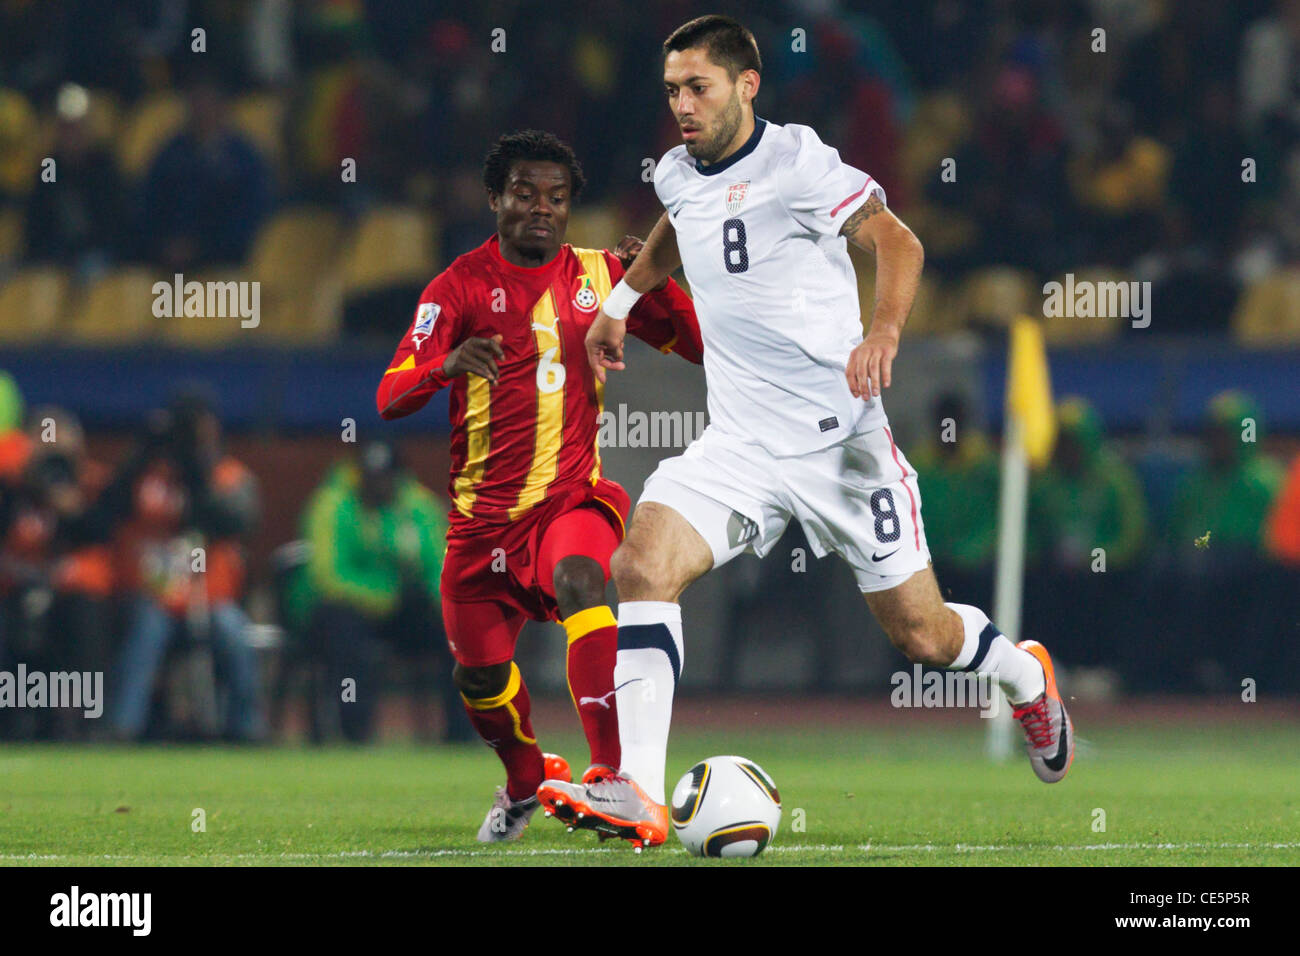 Clint Dempsey of the United States (R) on the ball against Anthony Annan of Ghana (L) during a FIFA World Cup round of 16 match. Stock Photo